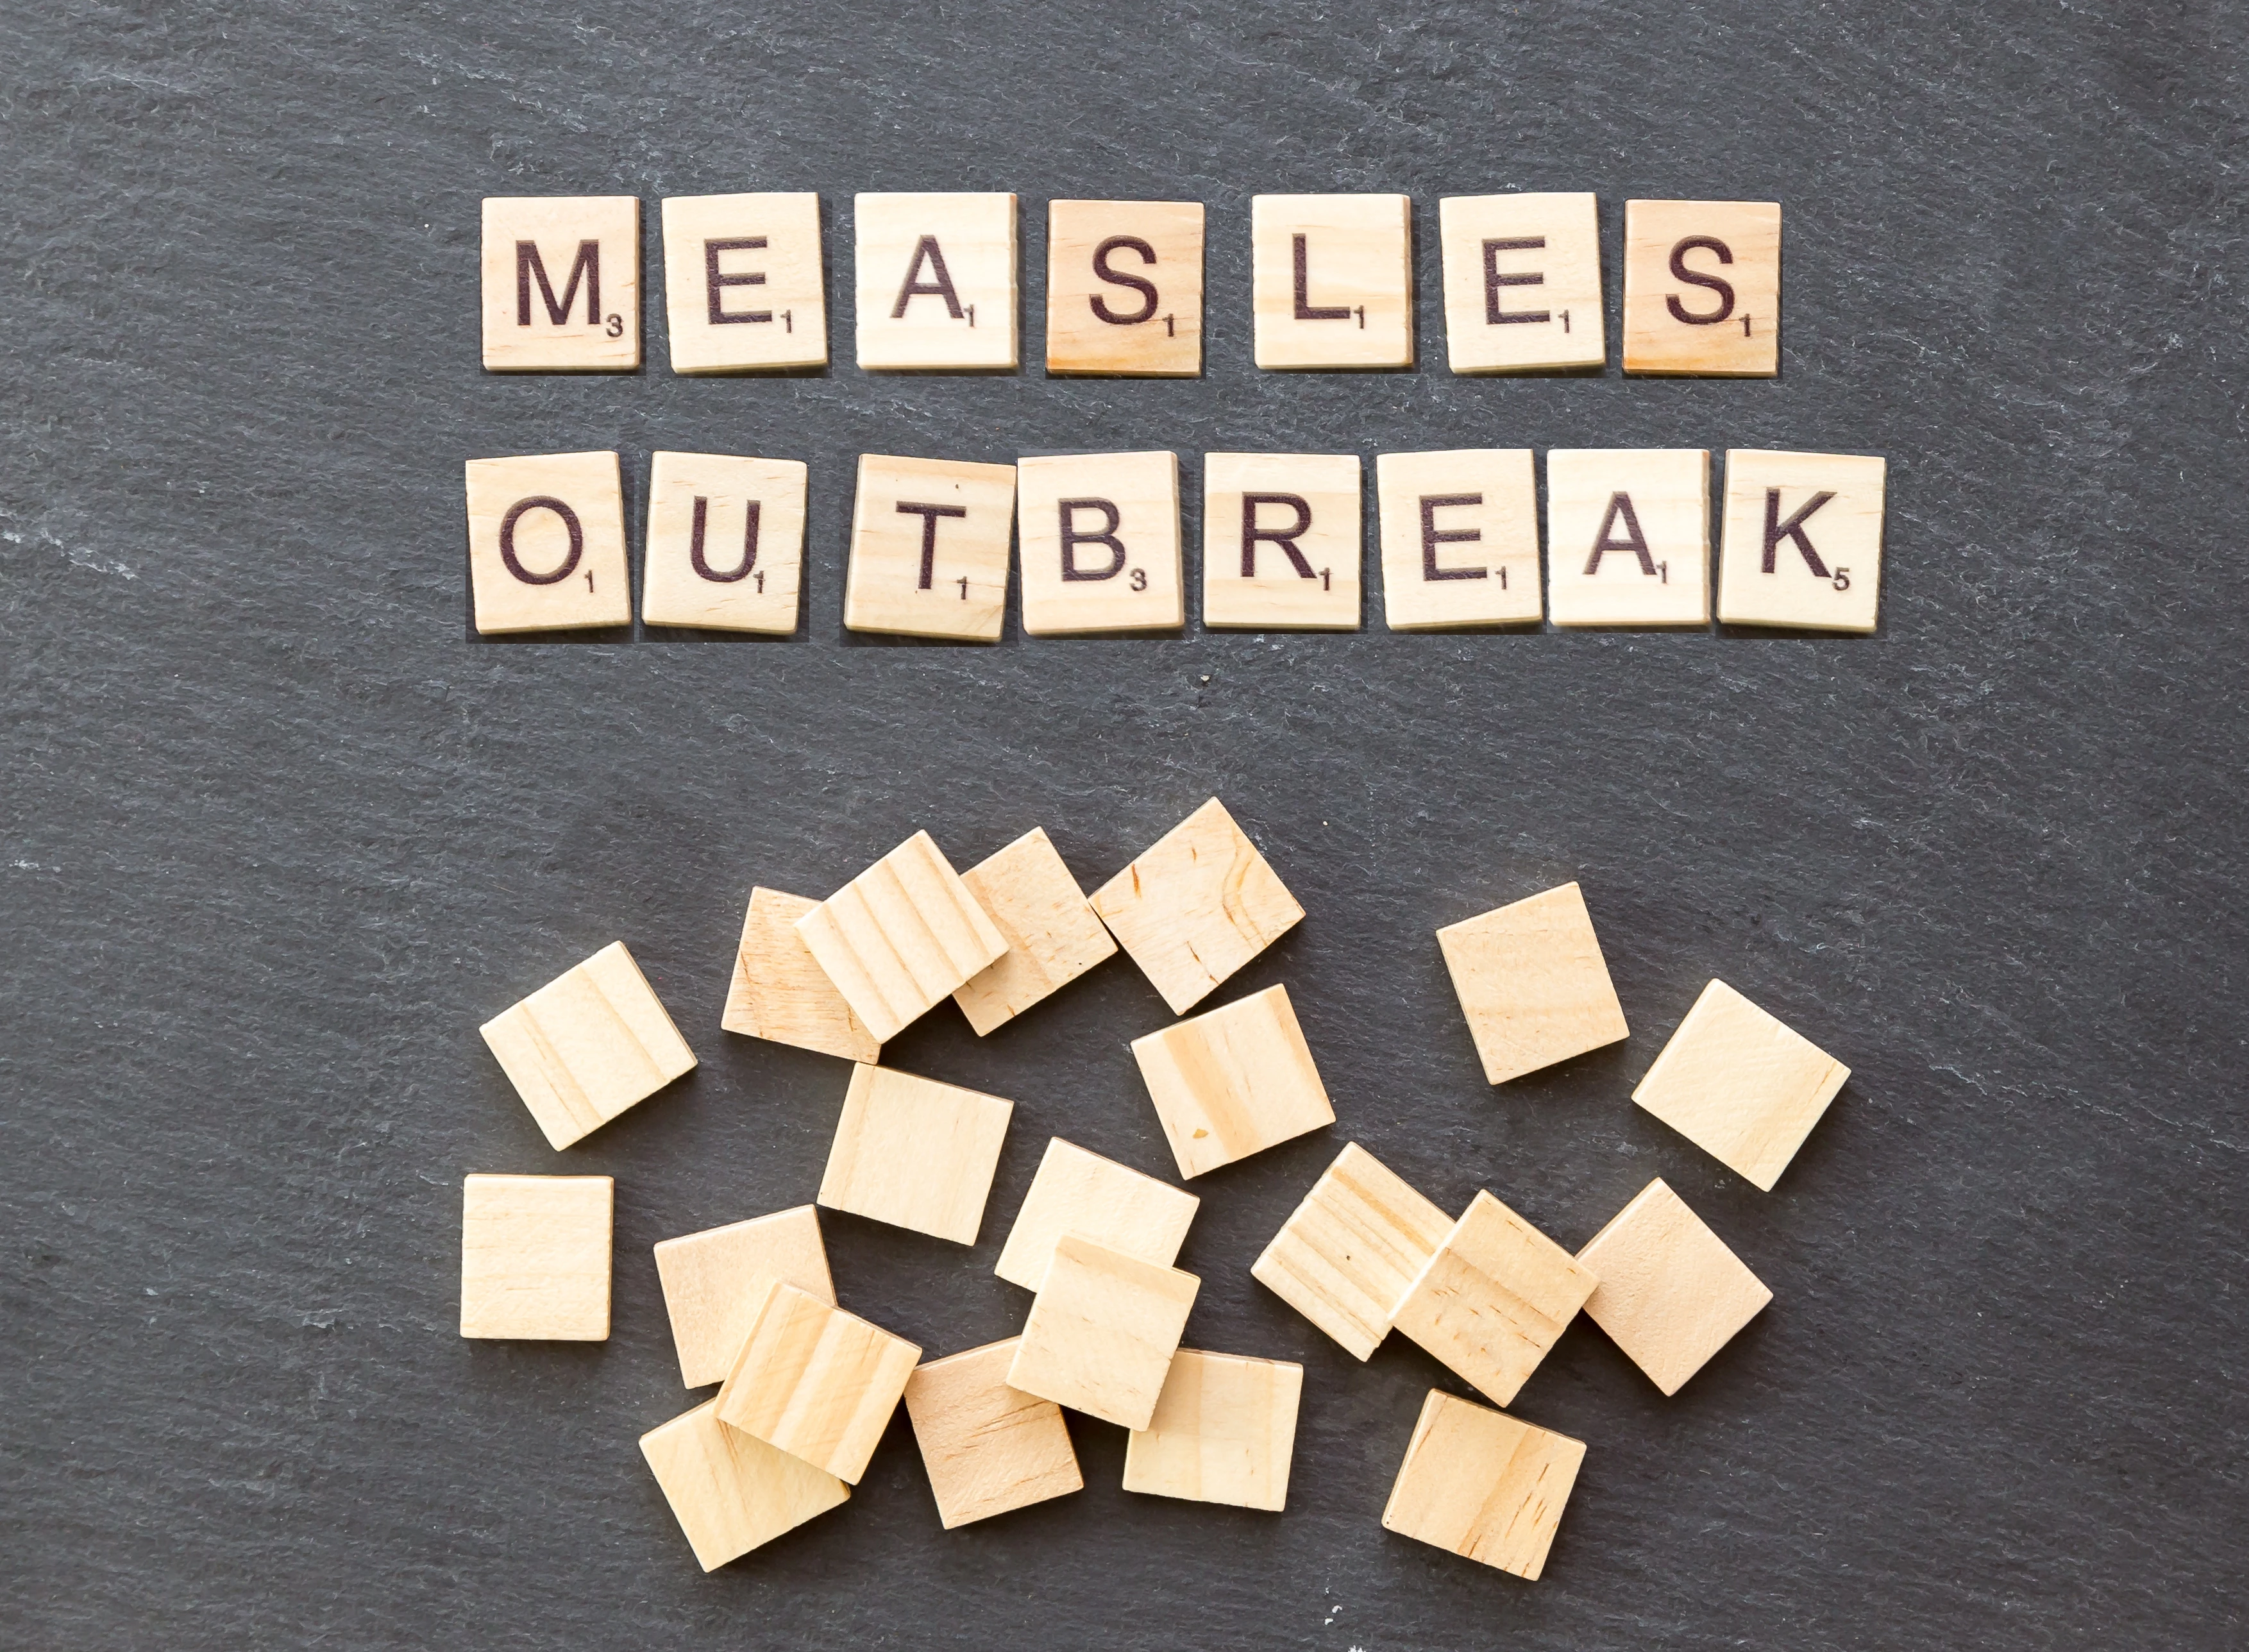 Pacific Northwest measles outbreak spreads